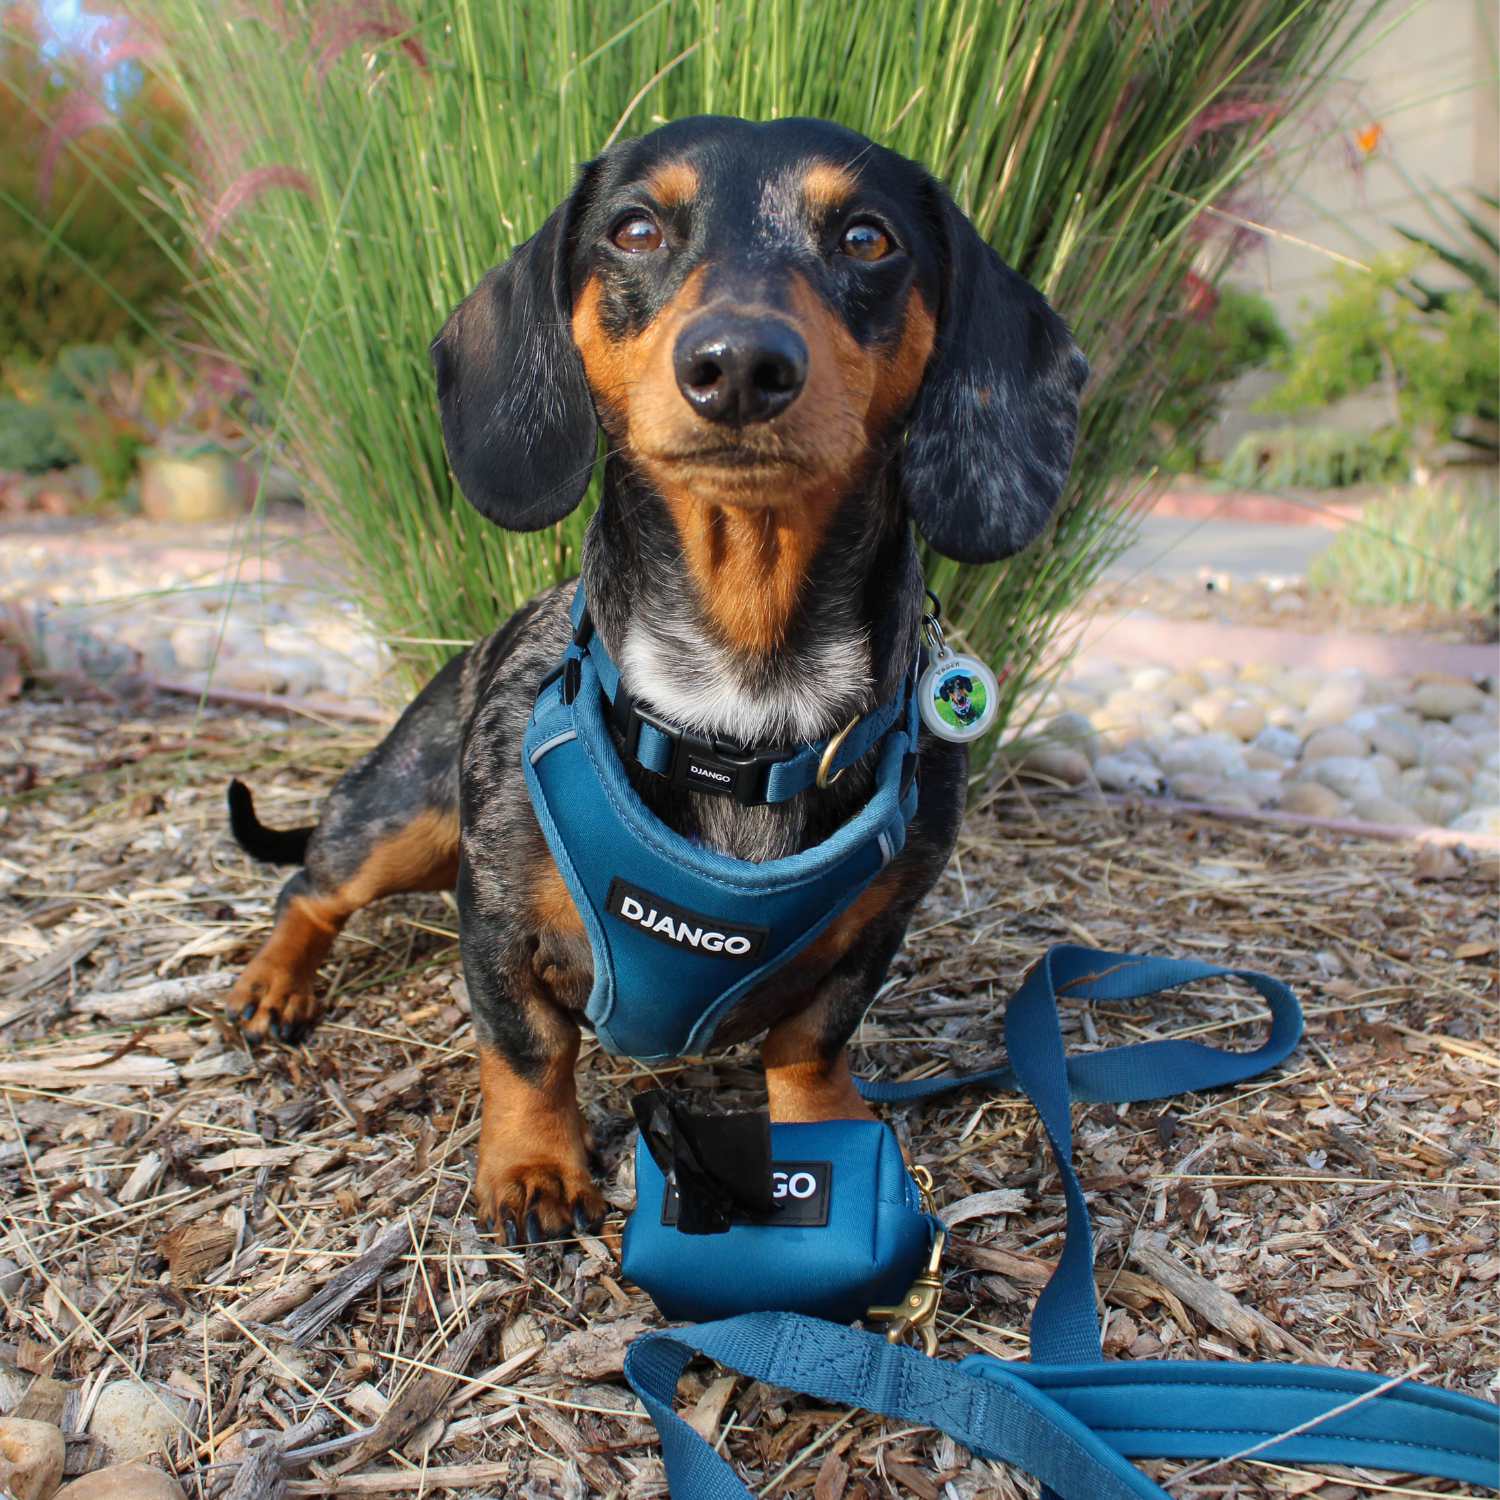 DJANGO Adventure Dog Collar in Indigo Blue - Modern, durable, and stylish collar for small and medium dogs and puppies with solid cast brass hardware - djangobrand.com